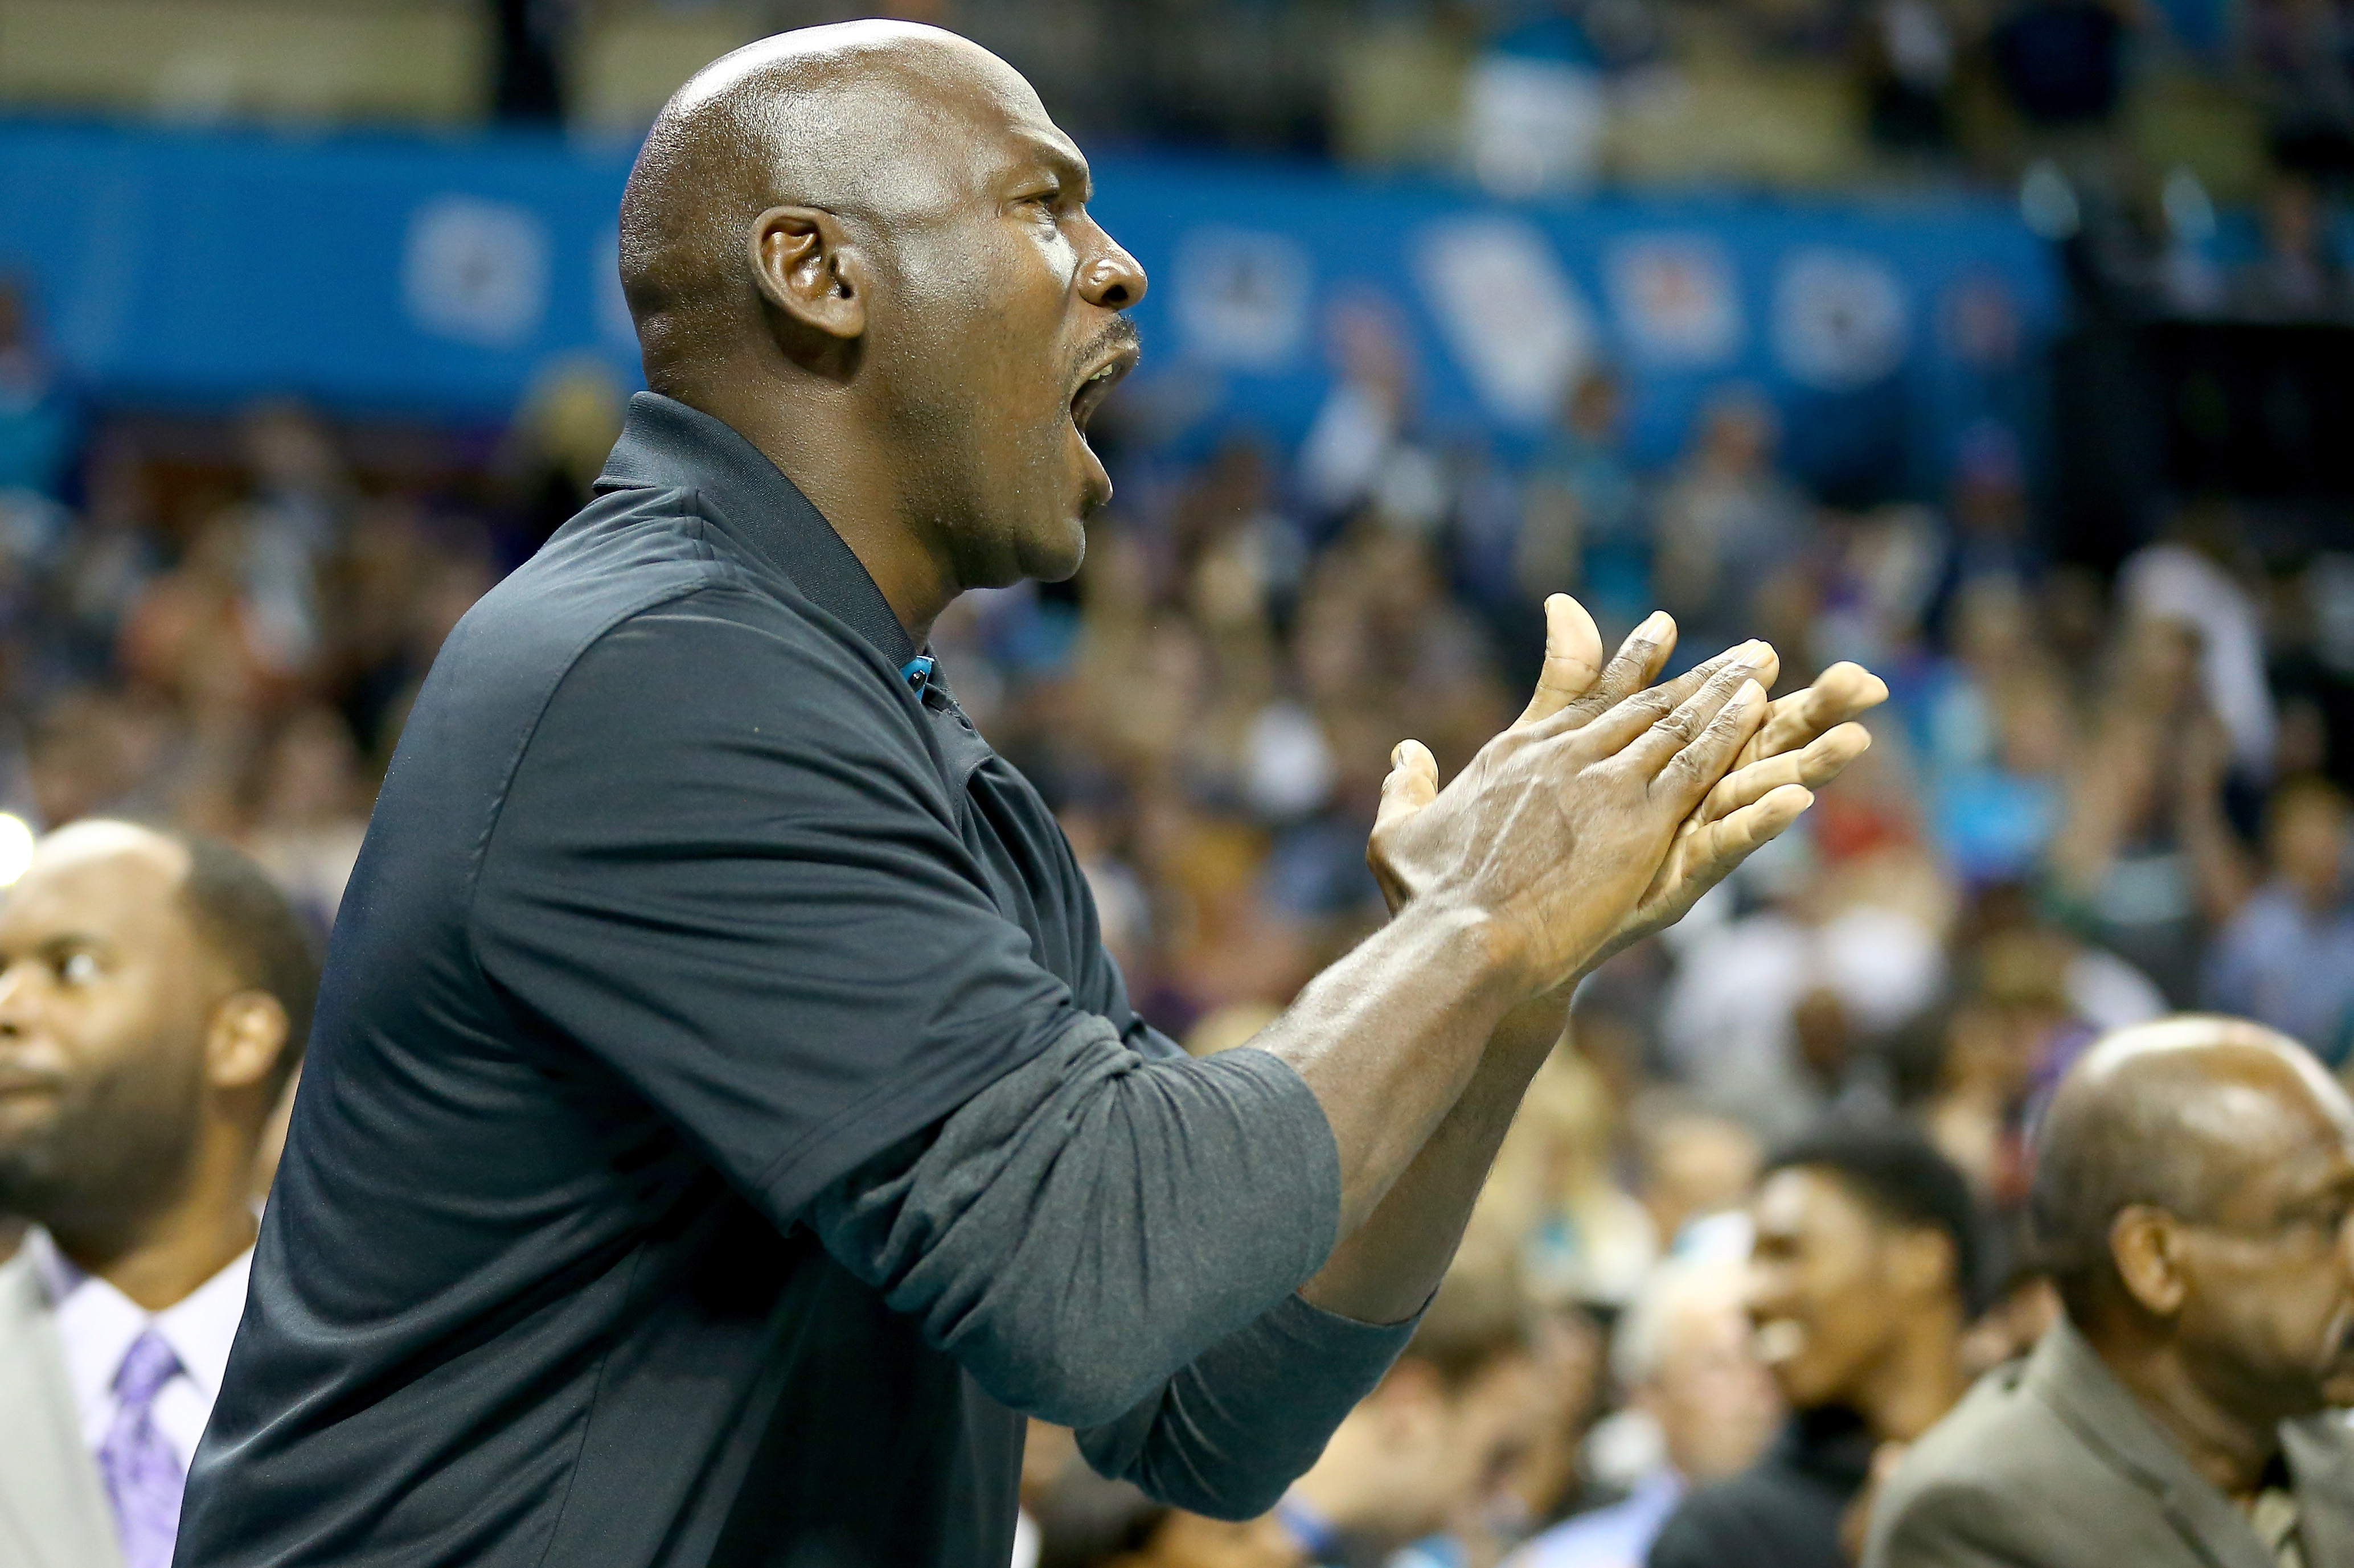 Michael Jordan, owner of the Charlotte Hornets, watches on during their game against the Milwaukee Bucks at Time Warner Cable Arena on October 29, 2014 in Charlotte, North Carolina. (Streeter Lecka&mdash;Getty Images)